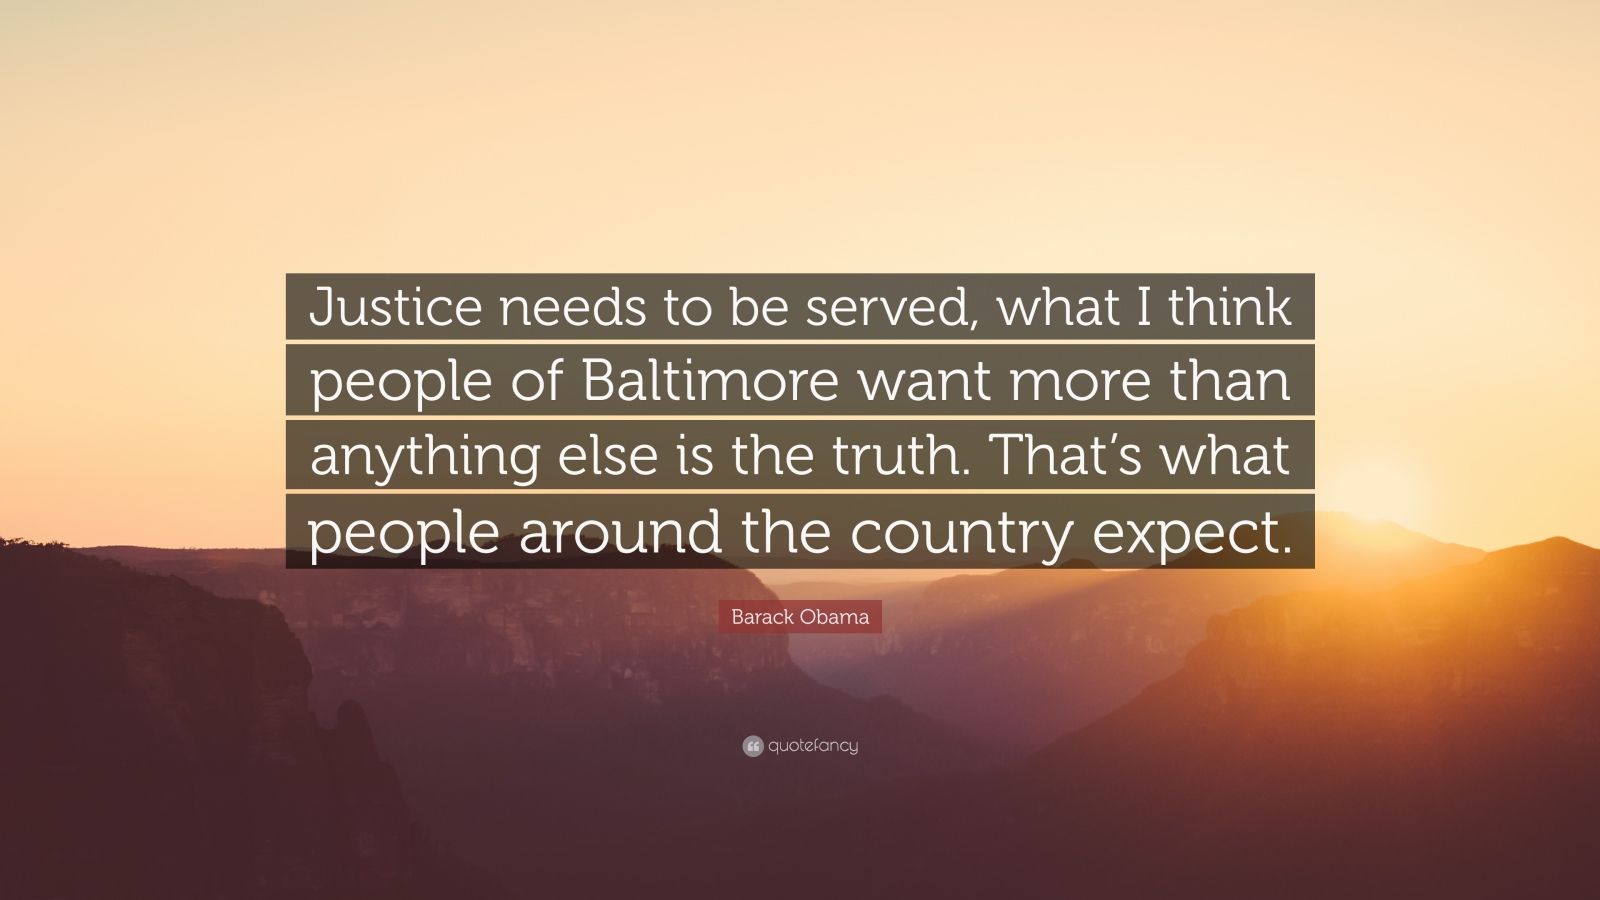 Barack Obama Quote “Justice needs to be served, what I